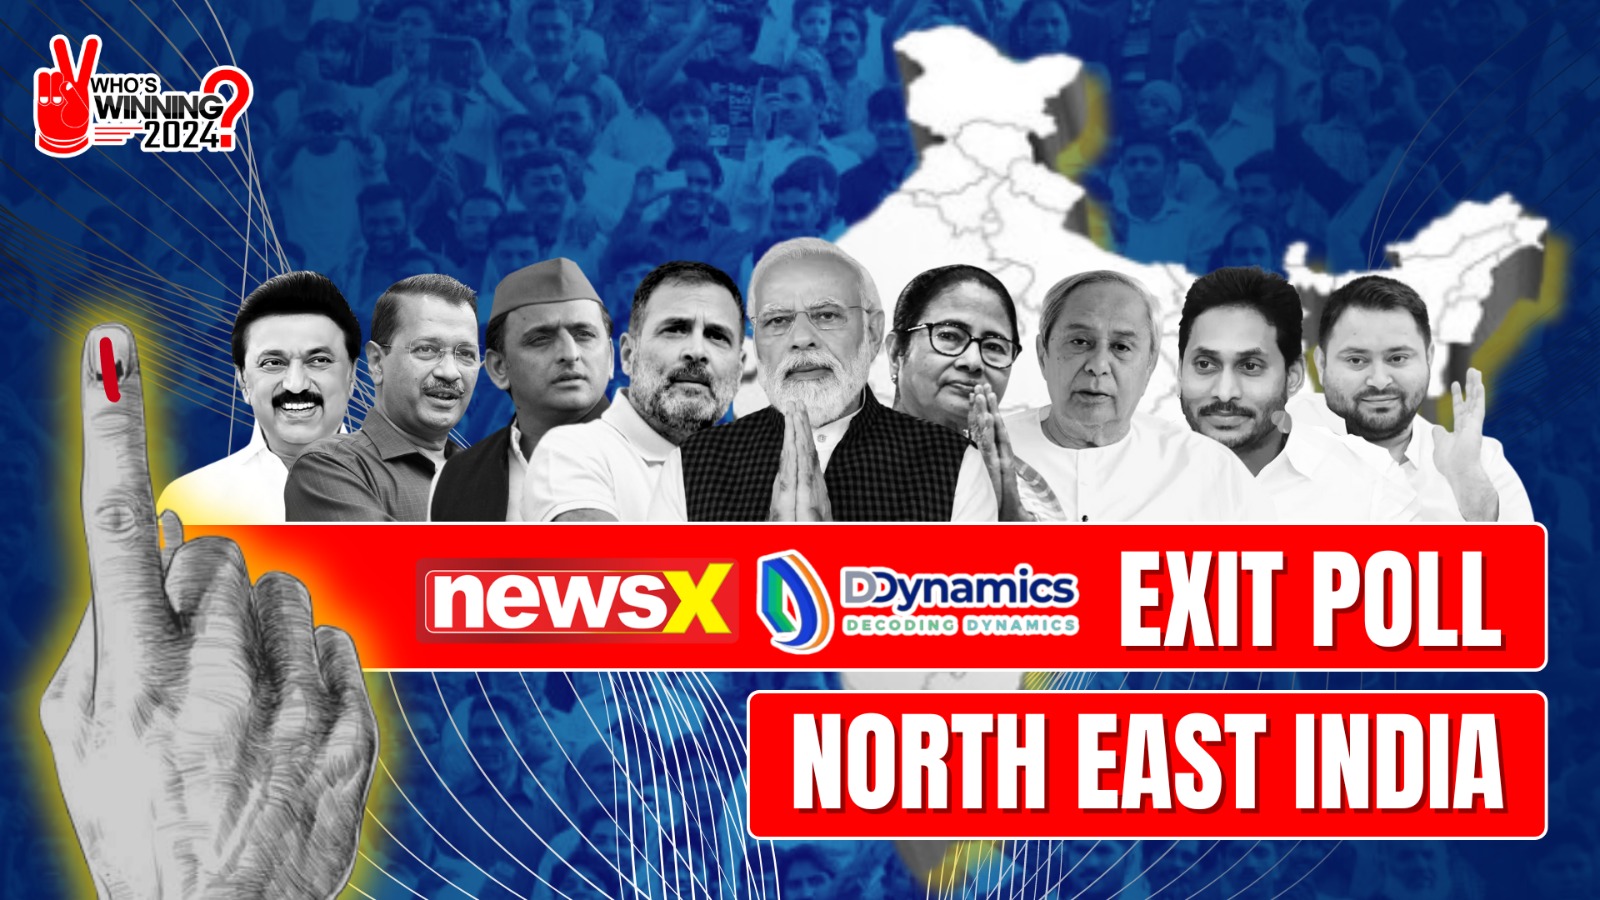 Exit Poll 2024: The Bharatiya Janata Party Expected To Lead The Polls In The North Eastern Region With 13 Seats